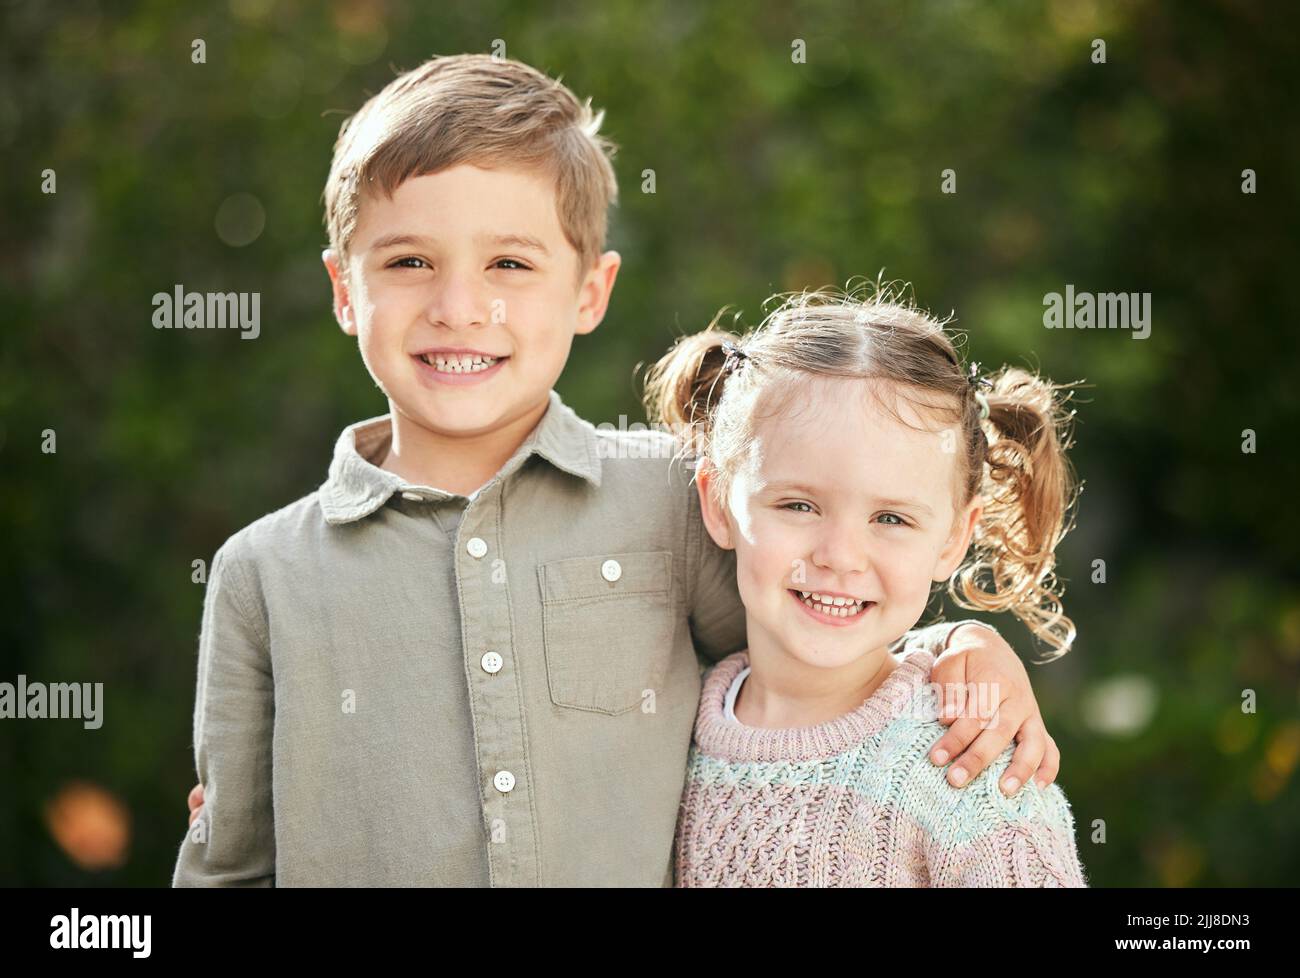 Hes my big brother. an adorable little boy and girl standing outside. Stock Photo